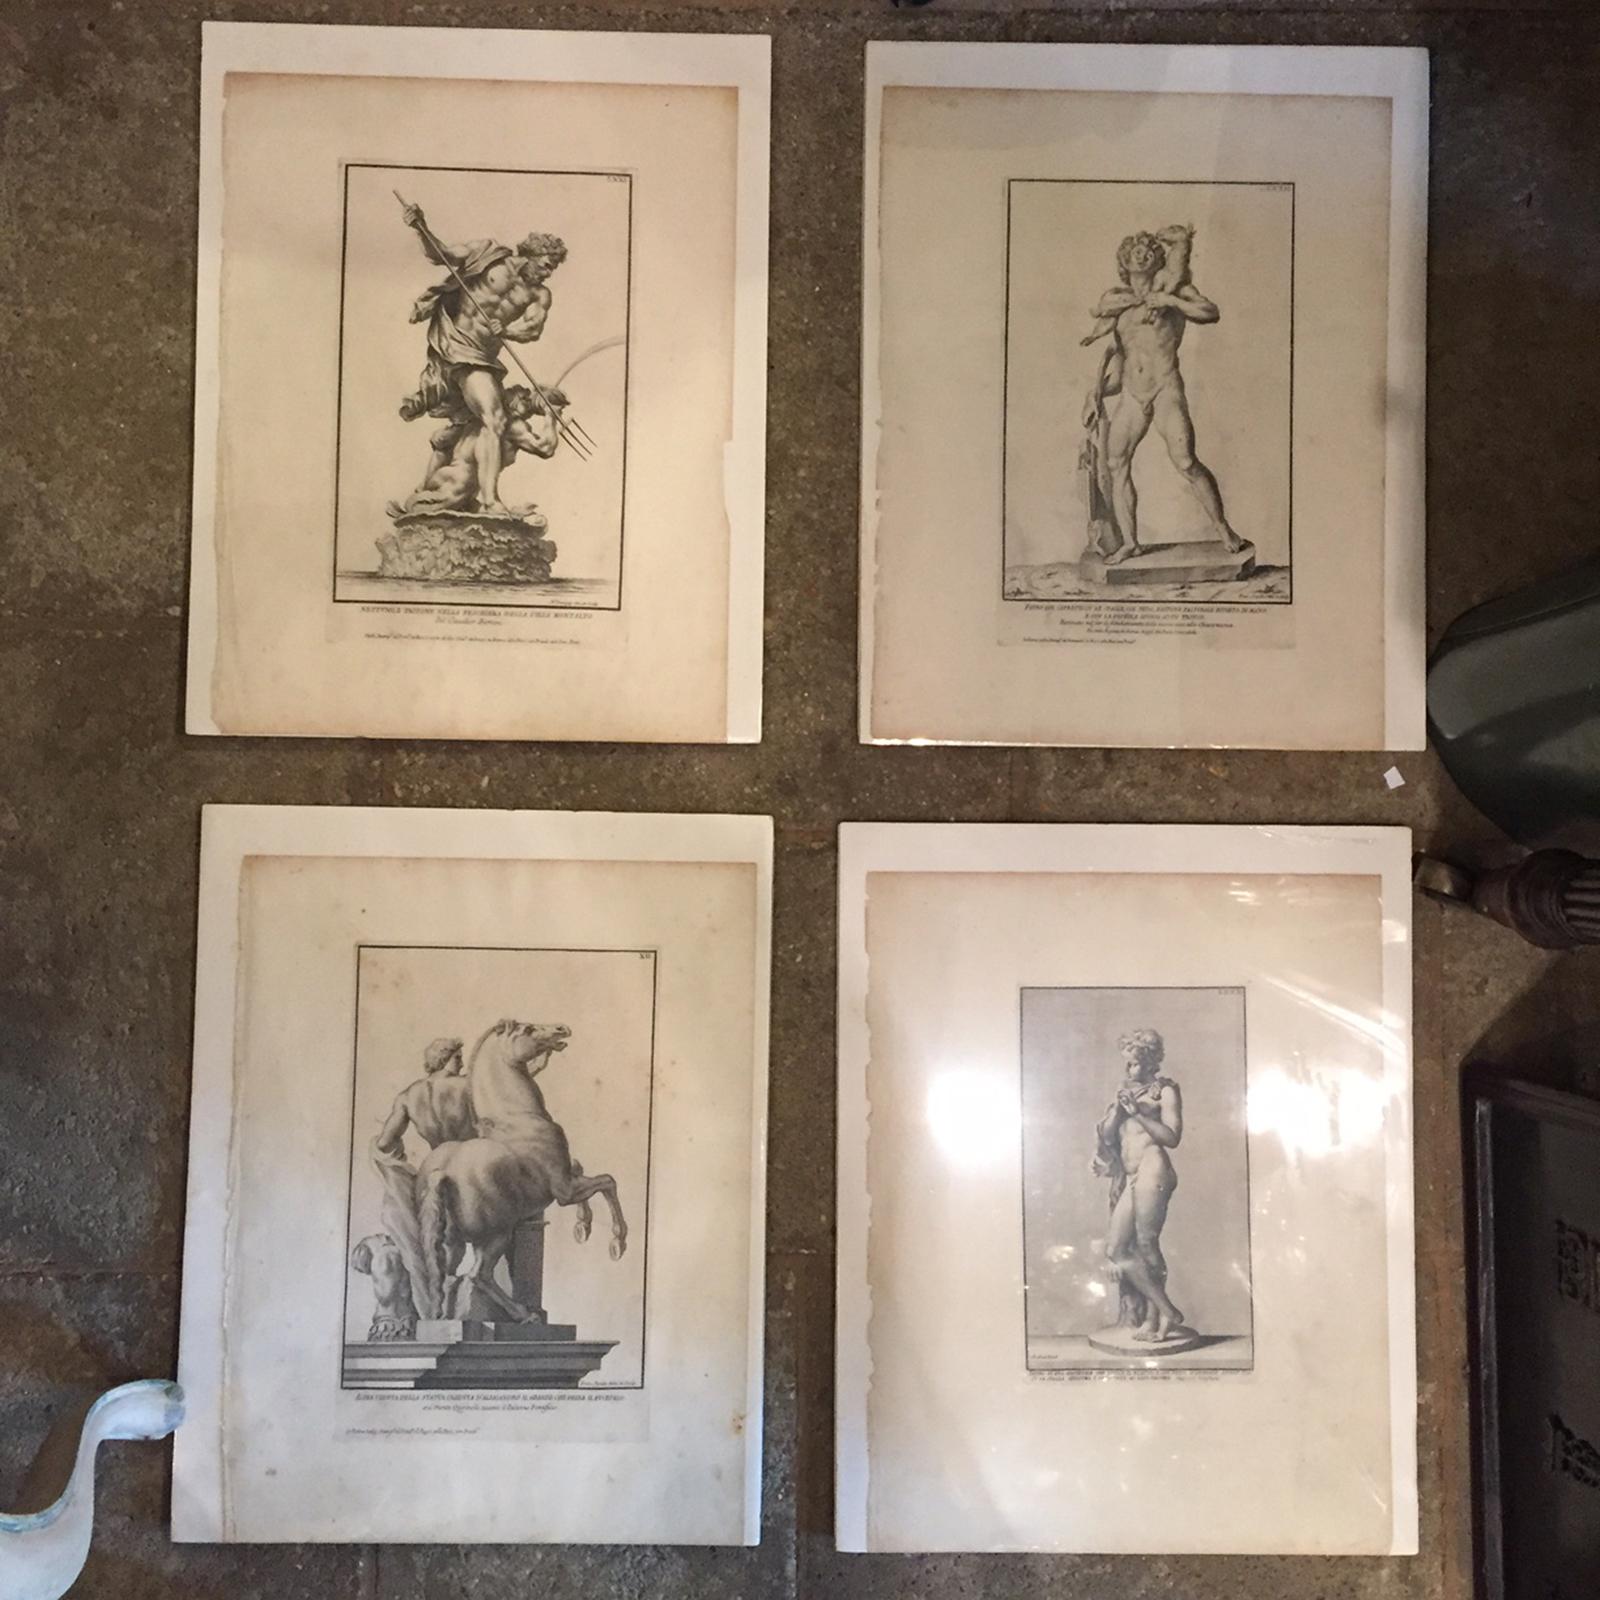 Set of four 18th century Italian neoclassical engravings of statues by various artists
1) Neptune & triton by Nicolas Dorigny
2) Kid with fawn by Francesco Faraone Aquila
3) Alexander the great with horse by Francesco Faraone Aquila
4) Young